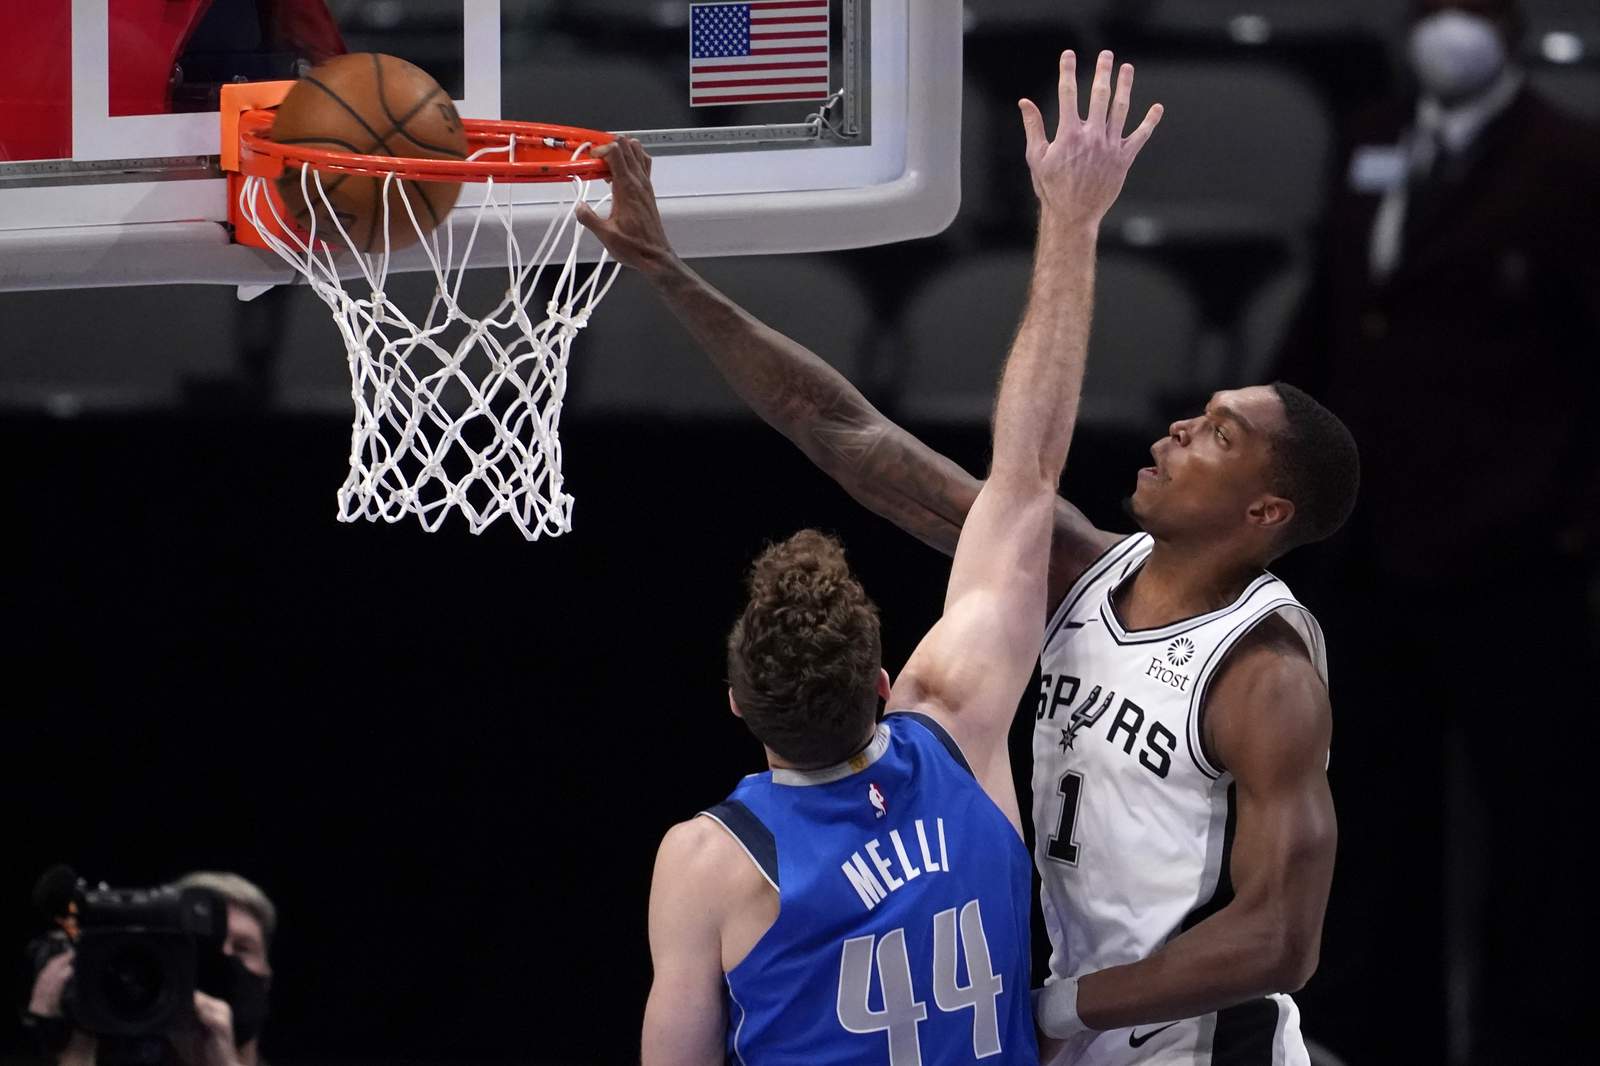 Manu Ginobili, Spurs fans and social media react to thunderous ‘poster’ dunk by Lonnie Walker over Mavs center